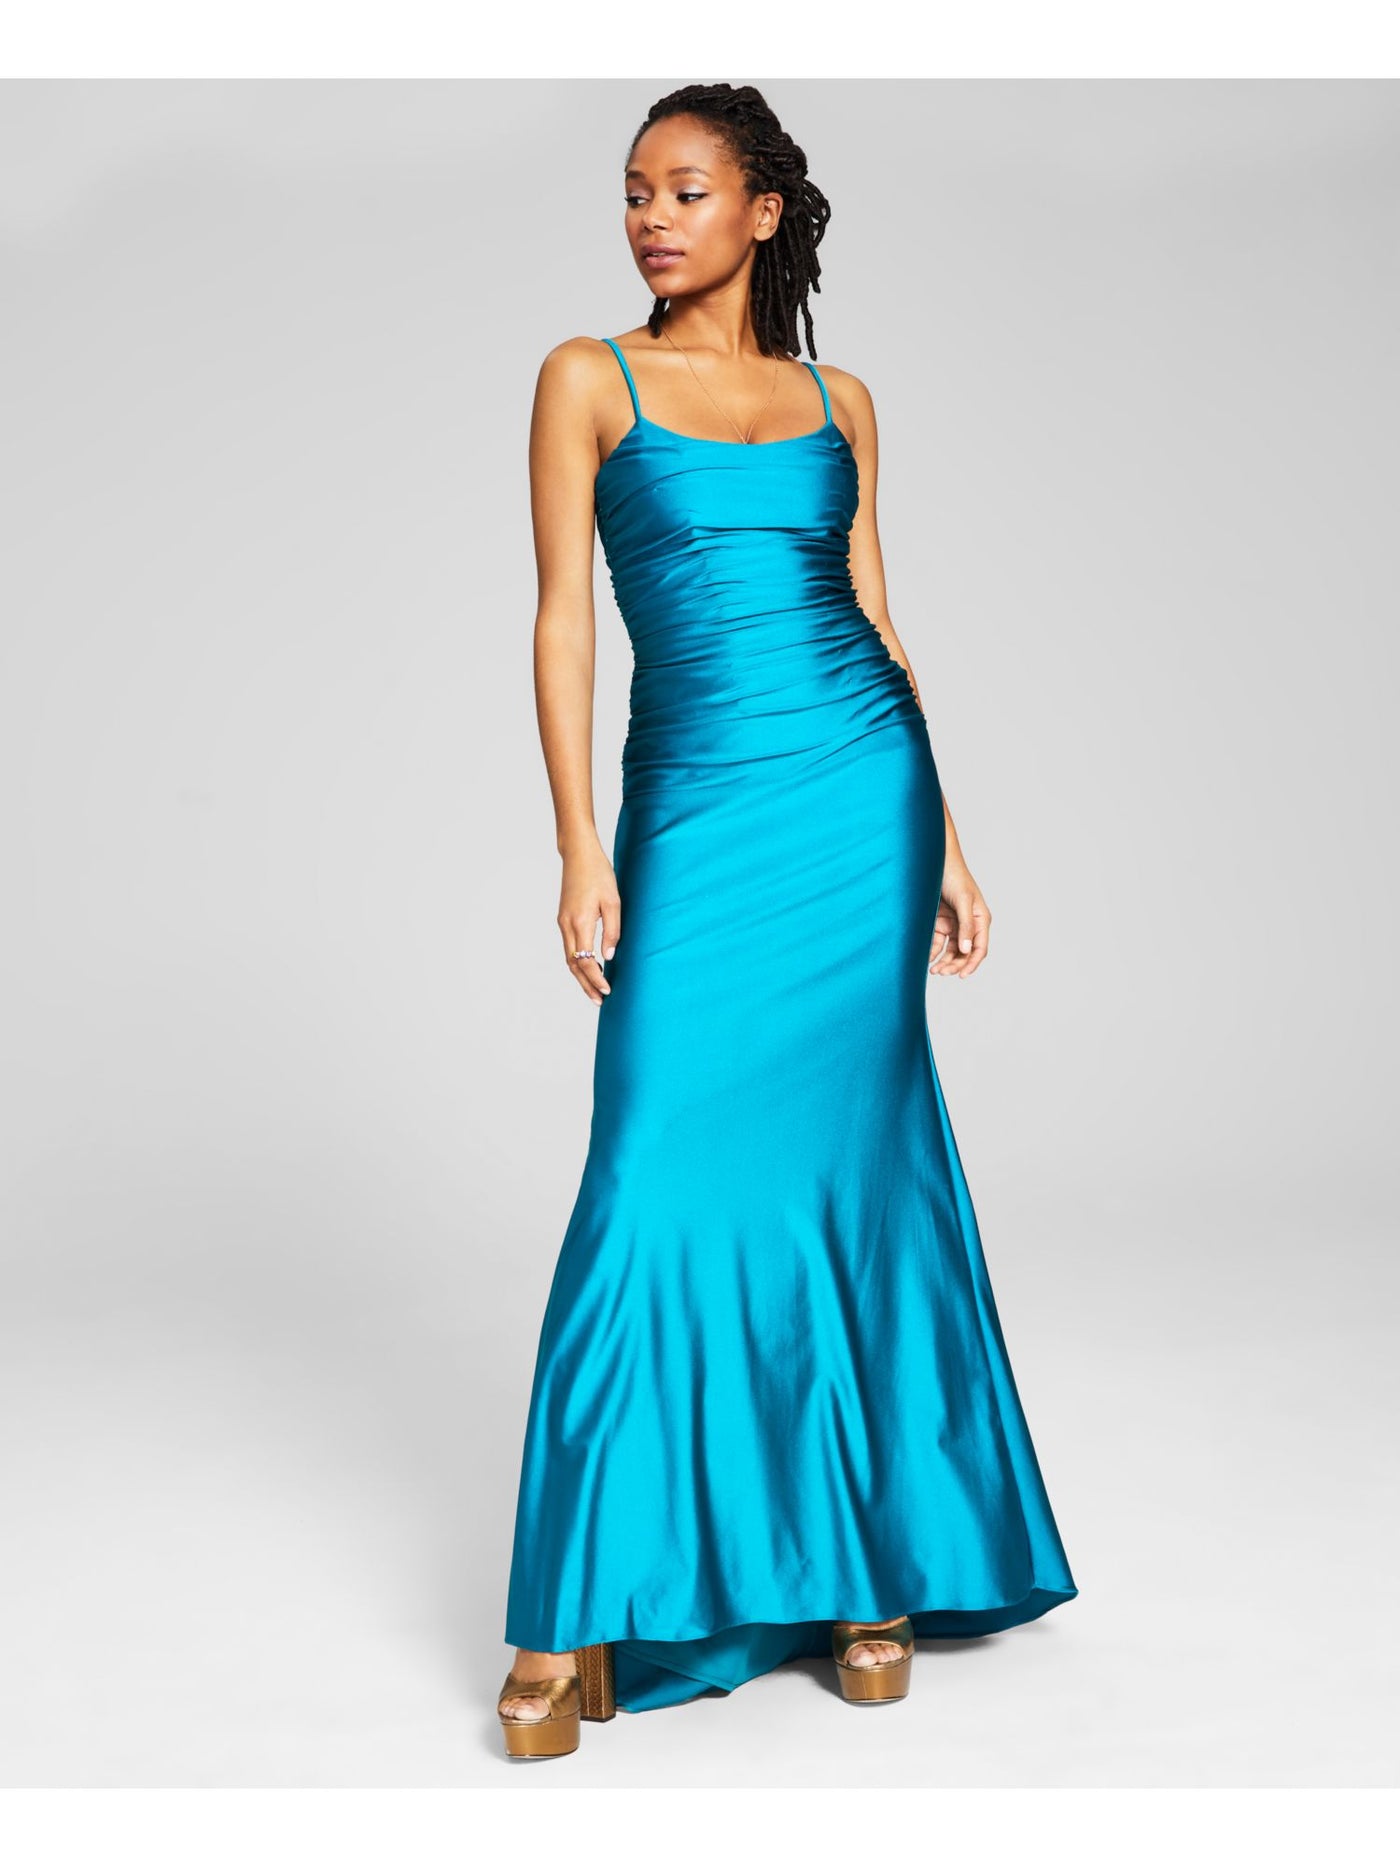 BLONDIE NITES Womens Zippered Ruched Crisscross Strappy Satin Spaghetti Strap Scoop Neck Full-Length Evening Gown Dress